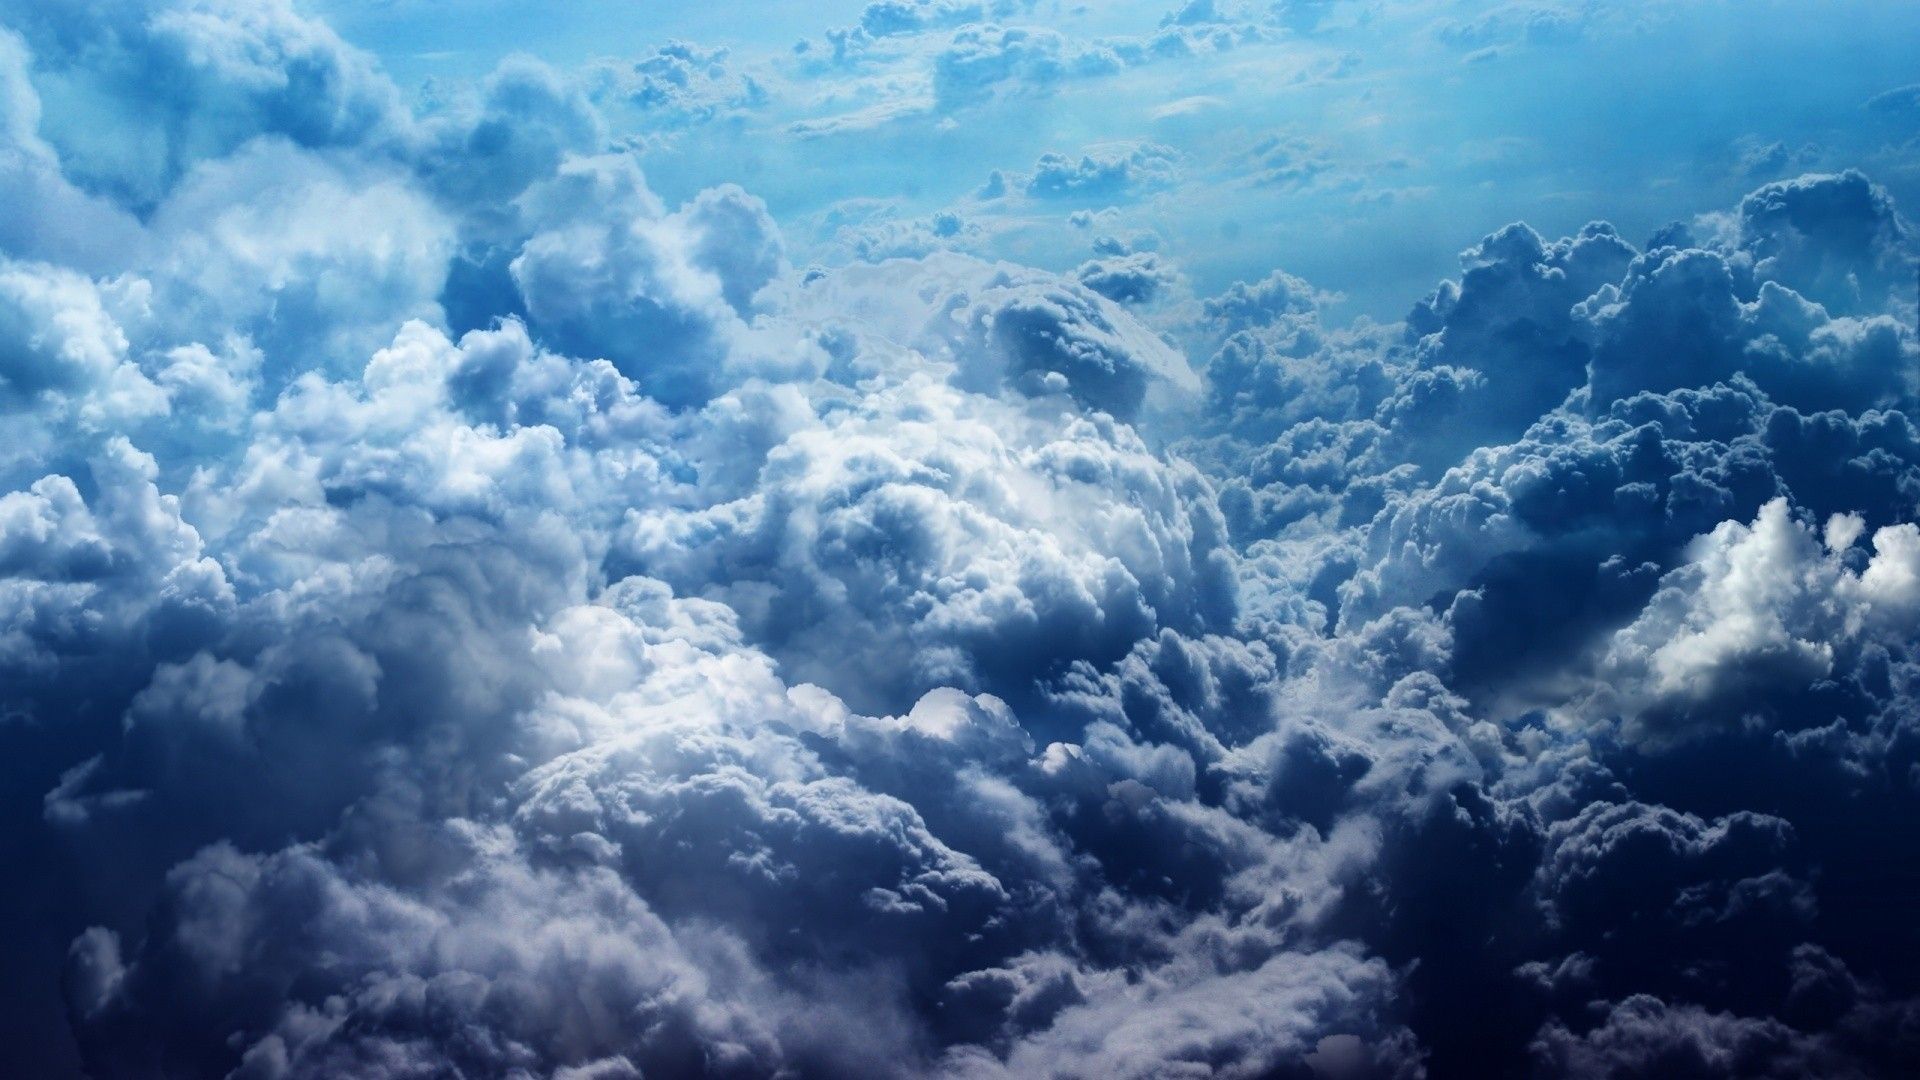 Aesthetic Mac Wallpaper Free Aesthetic Mac Background - Clouds, Cloud wallpaper, Sky and clouds